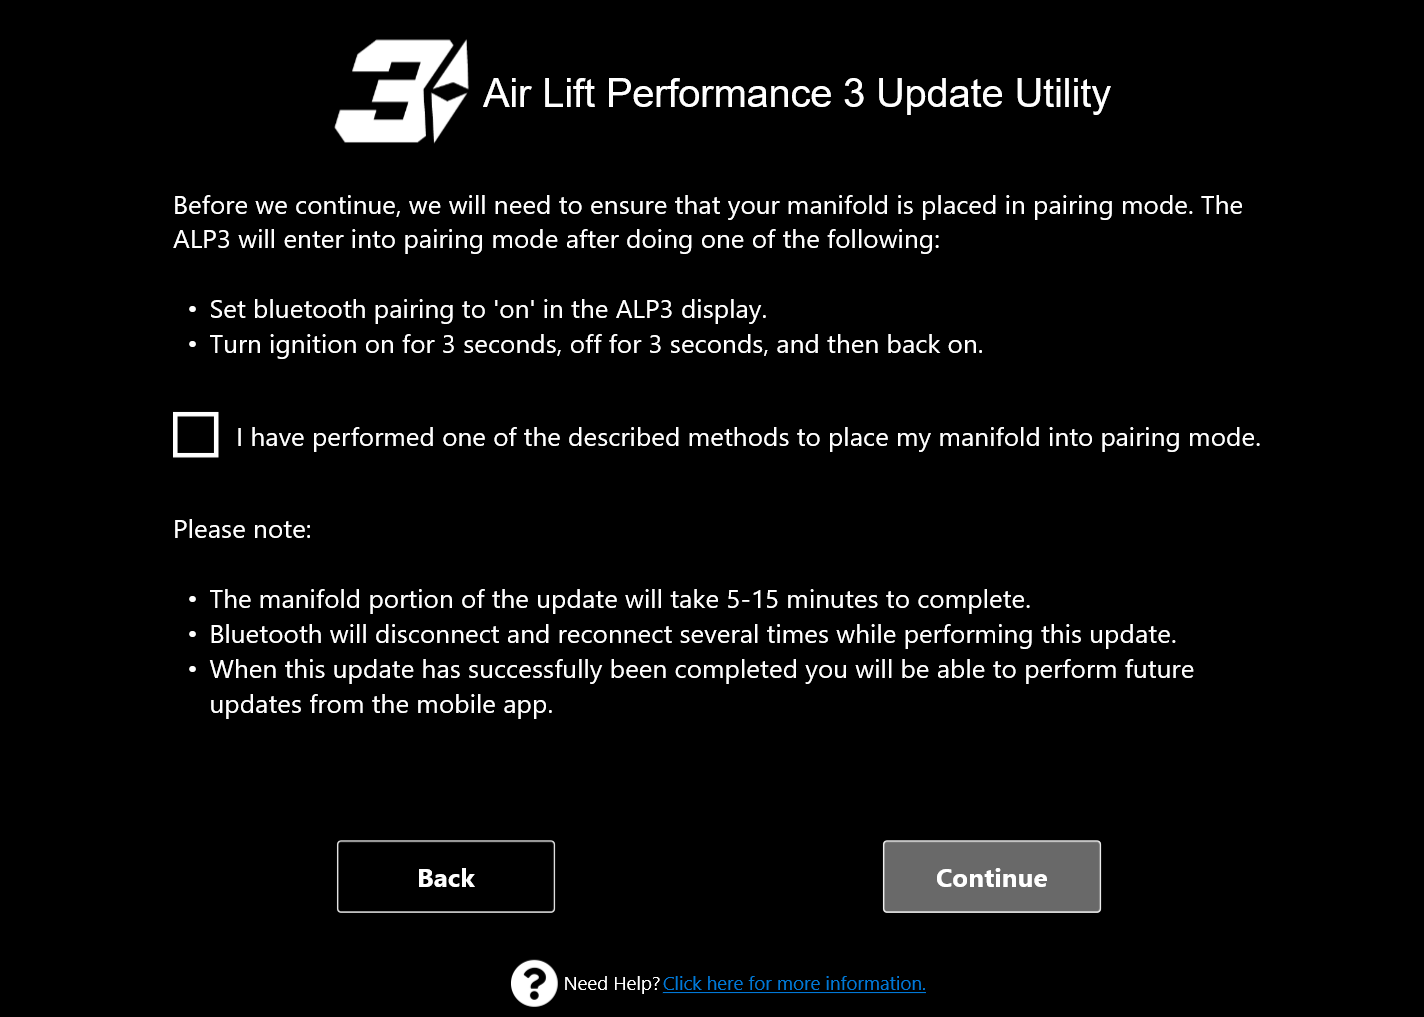 Air Lift Performance 3 Update Utility